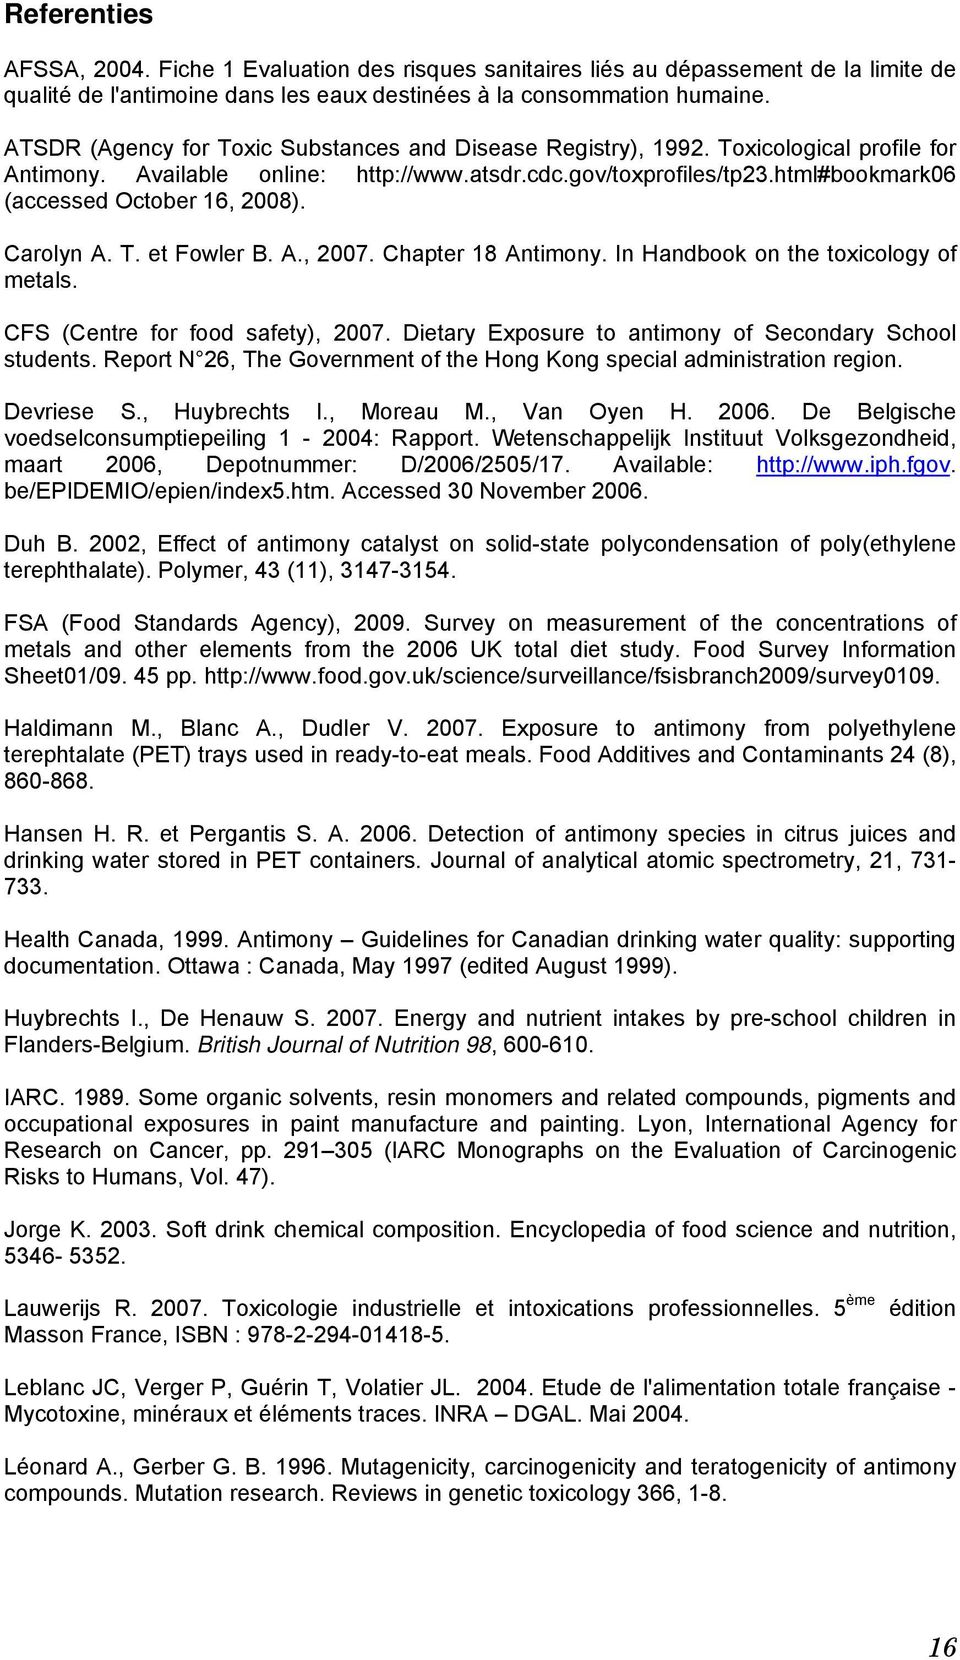 html#bookmark06 (accessed October 16, 2008). Carolyn A. T. et Fowler B. A., 2007. Chapter 18 Antimony. In Handbook on the toxicology of metals. CFS (Centre for food safety), 2007.